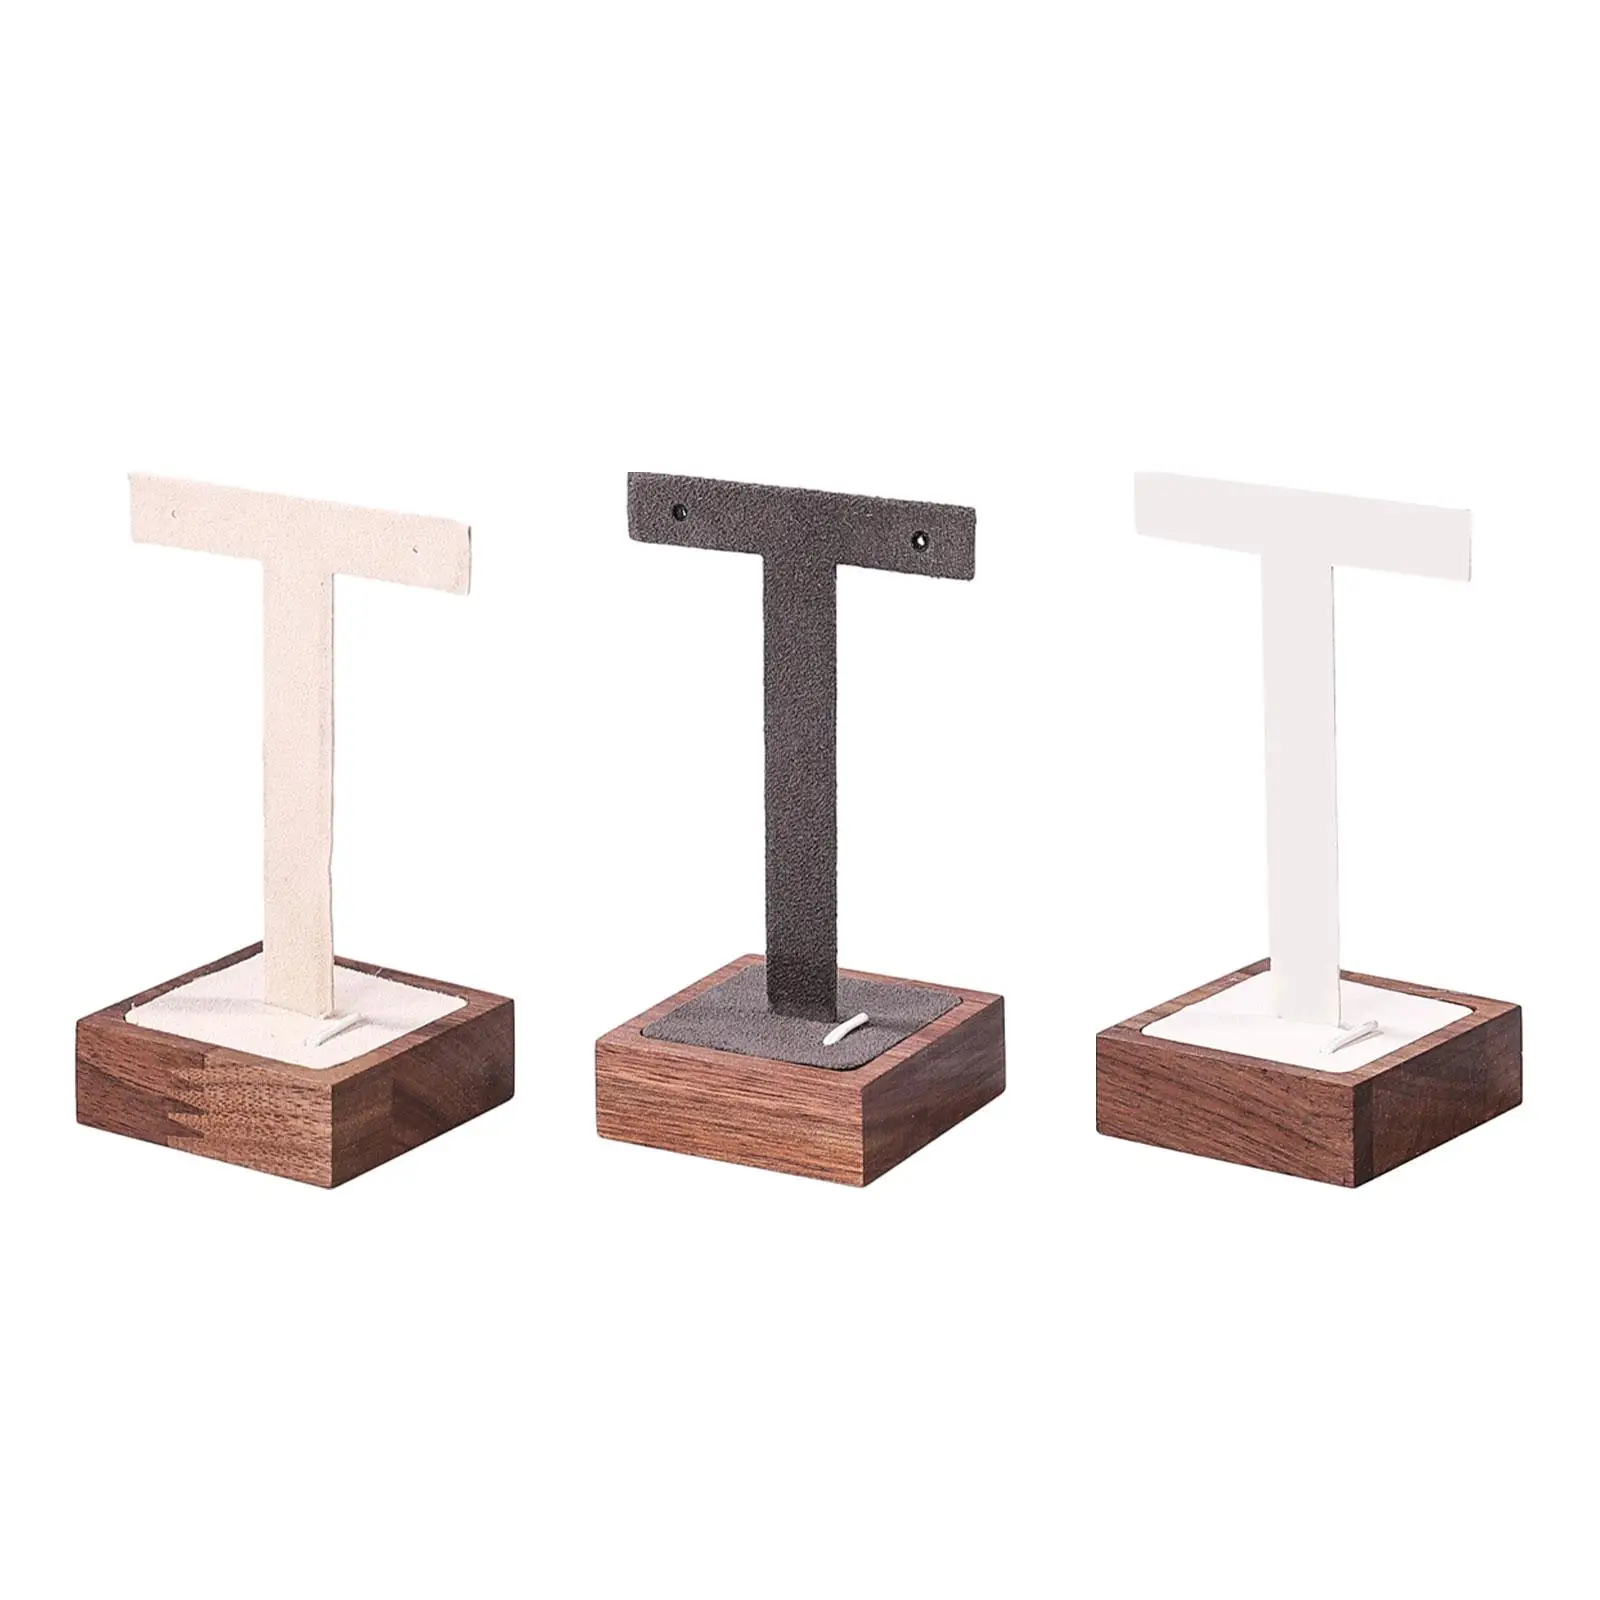 Earring Display Stand T Bar Dangling Earring Display Rack with Wooden Square Base Jewelry Organizer for Home Vanity Tabletop